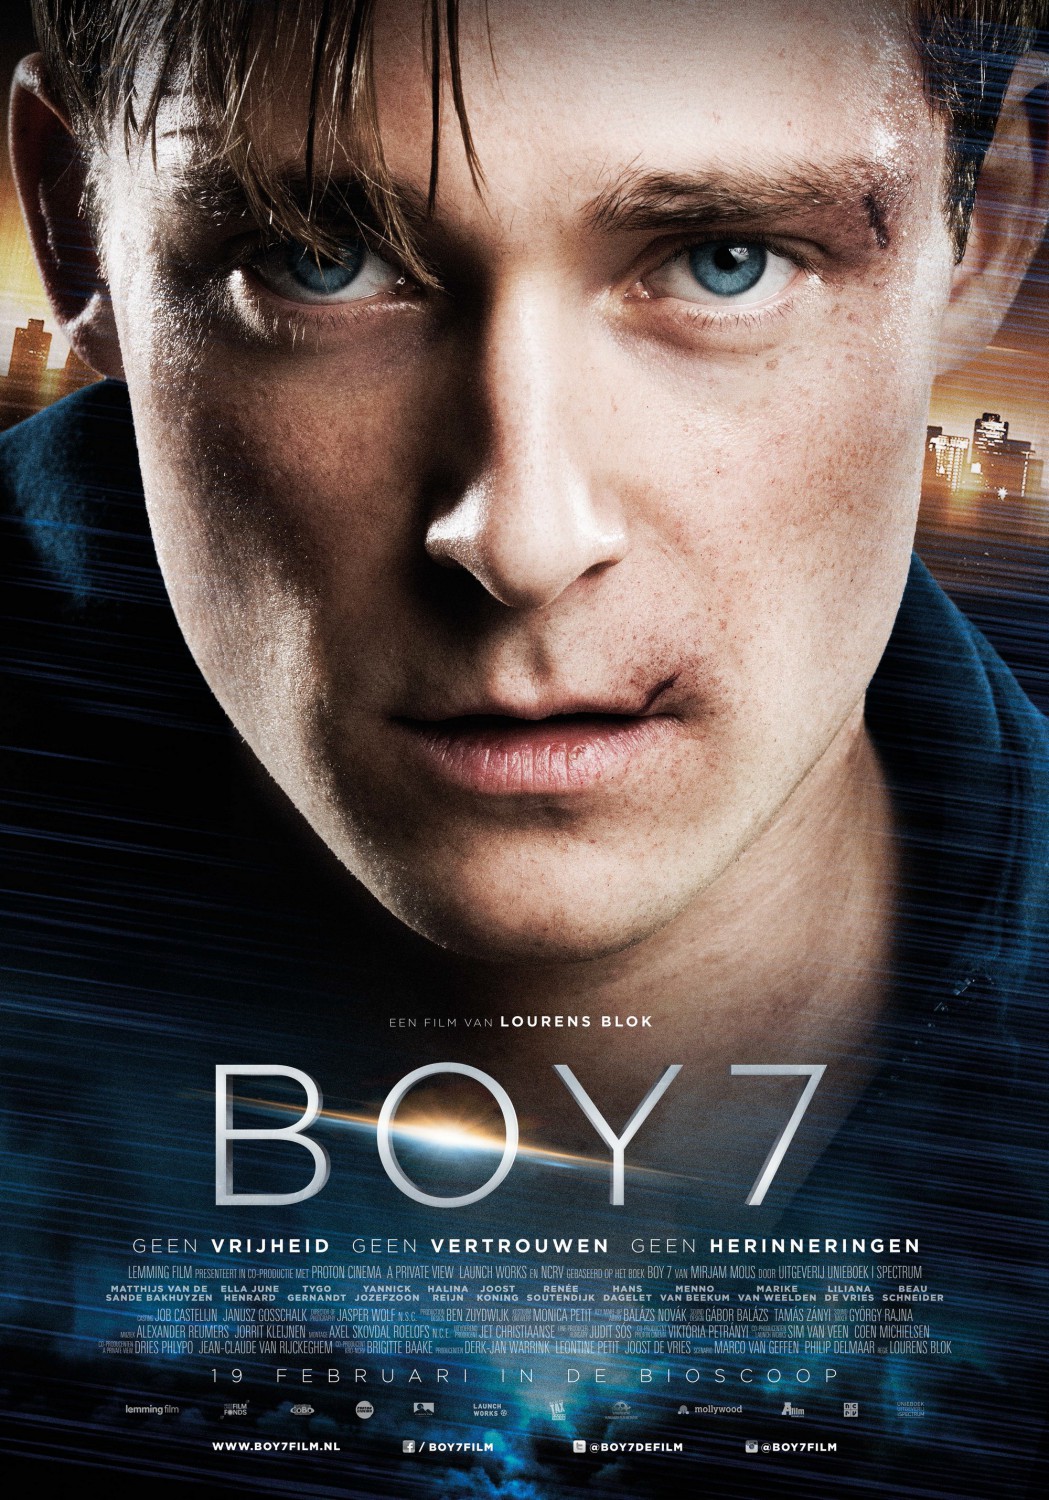 Extra Large Movie Poster Image for Boy 7 